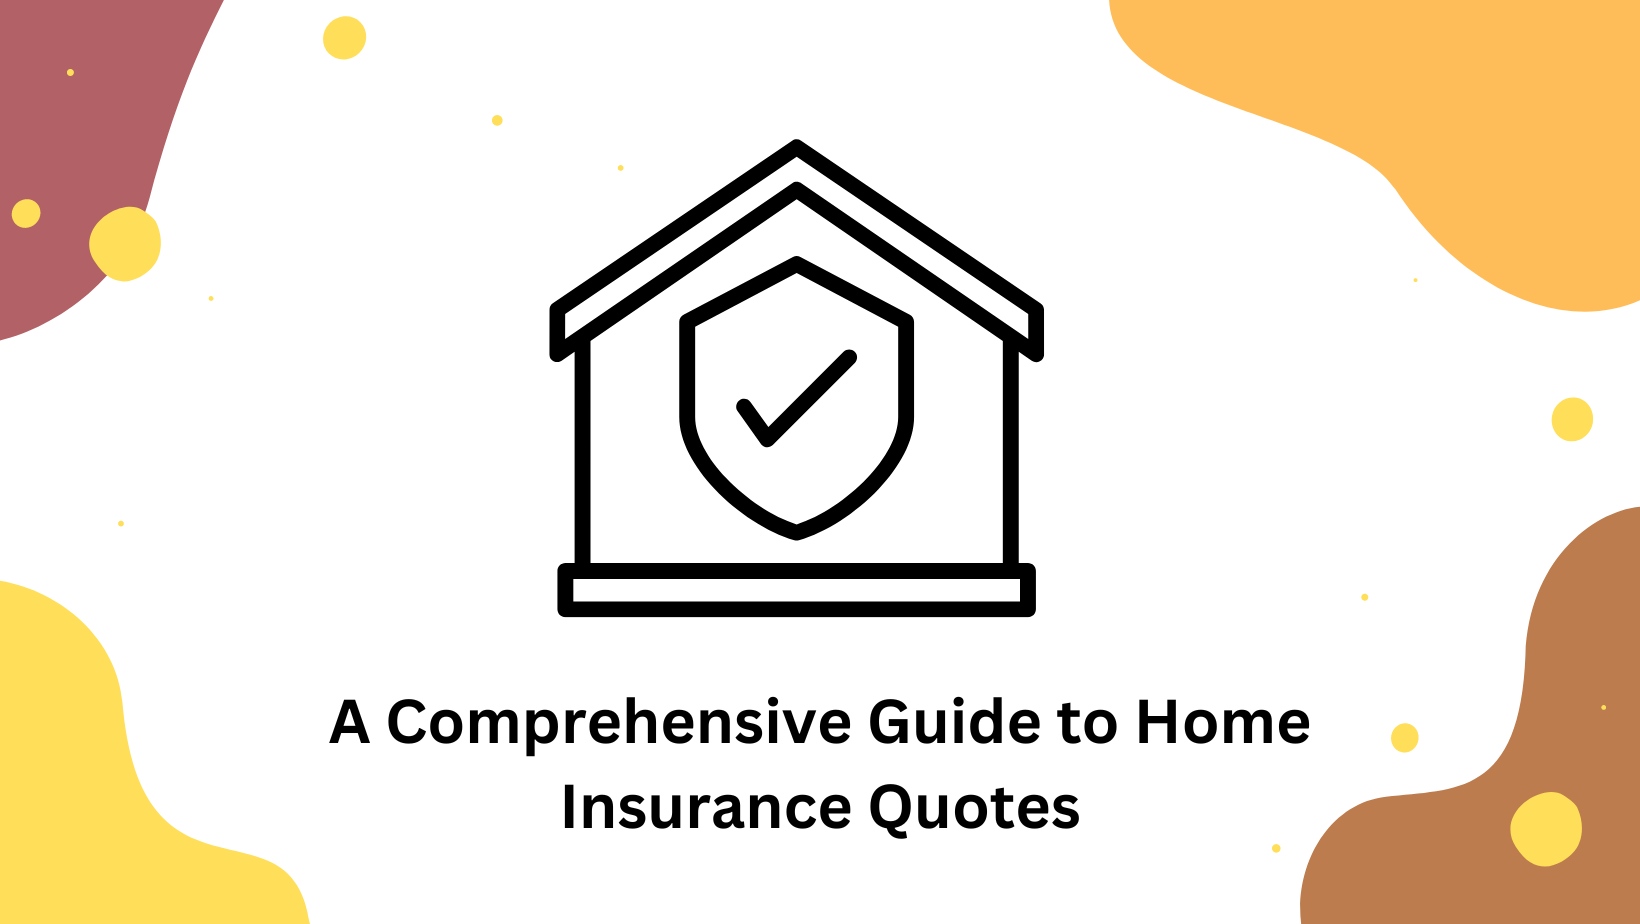 A Comprehensive Guide to Home Insurance Quotes